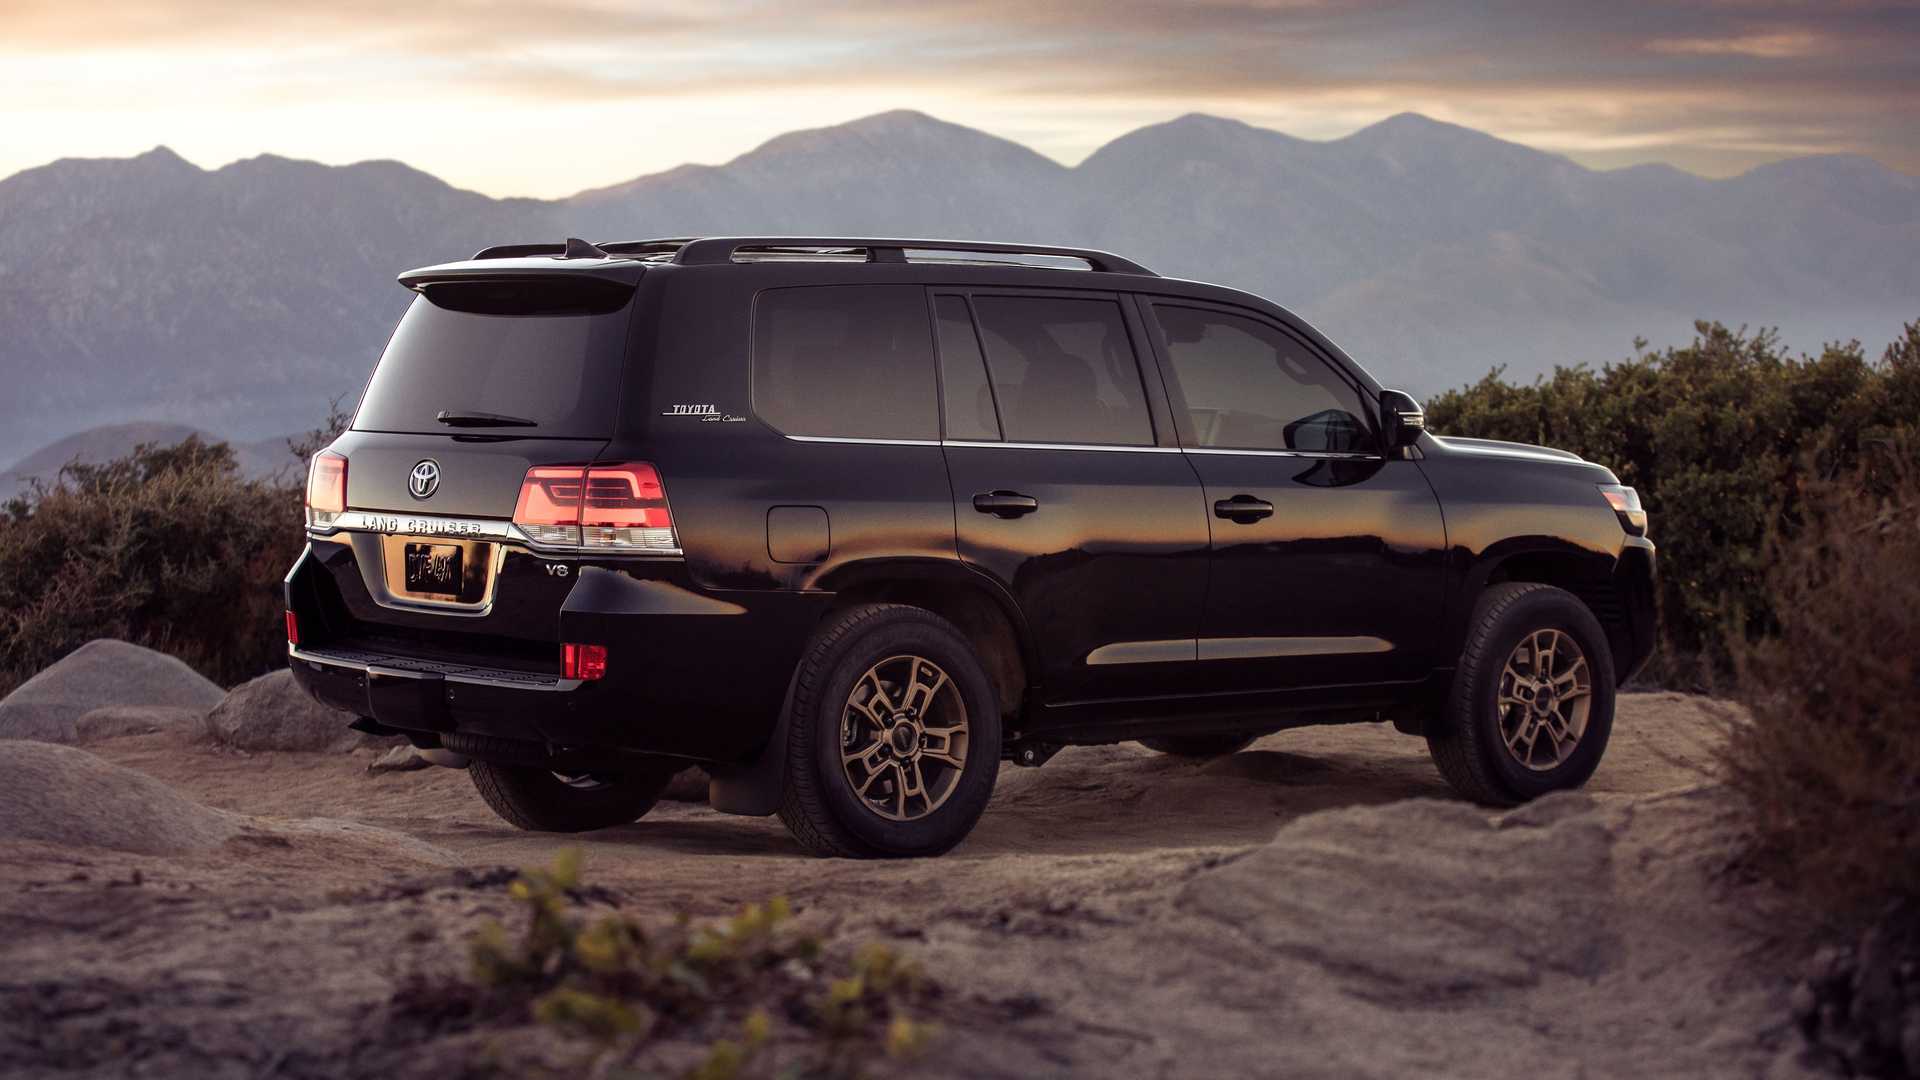 Toyota Land Cruiser Done For After 2021: Report